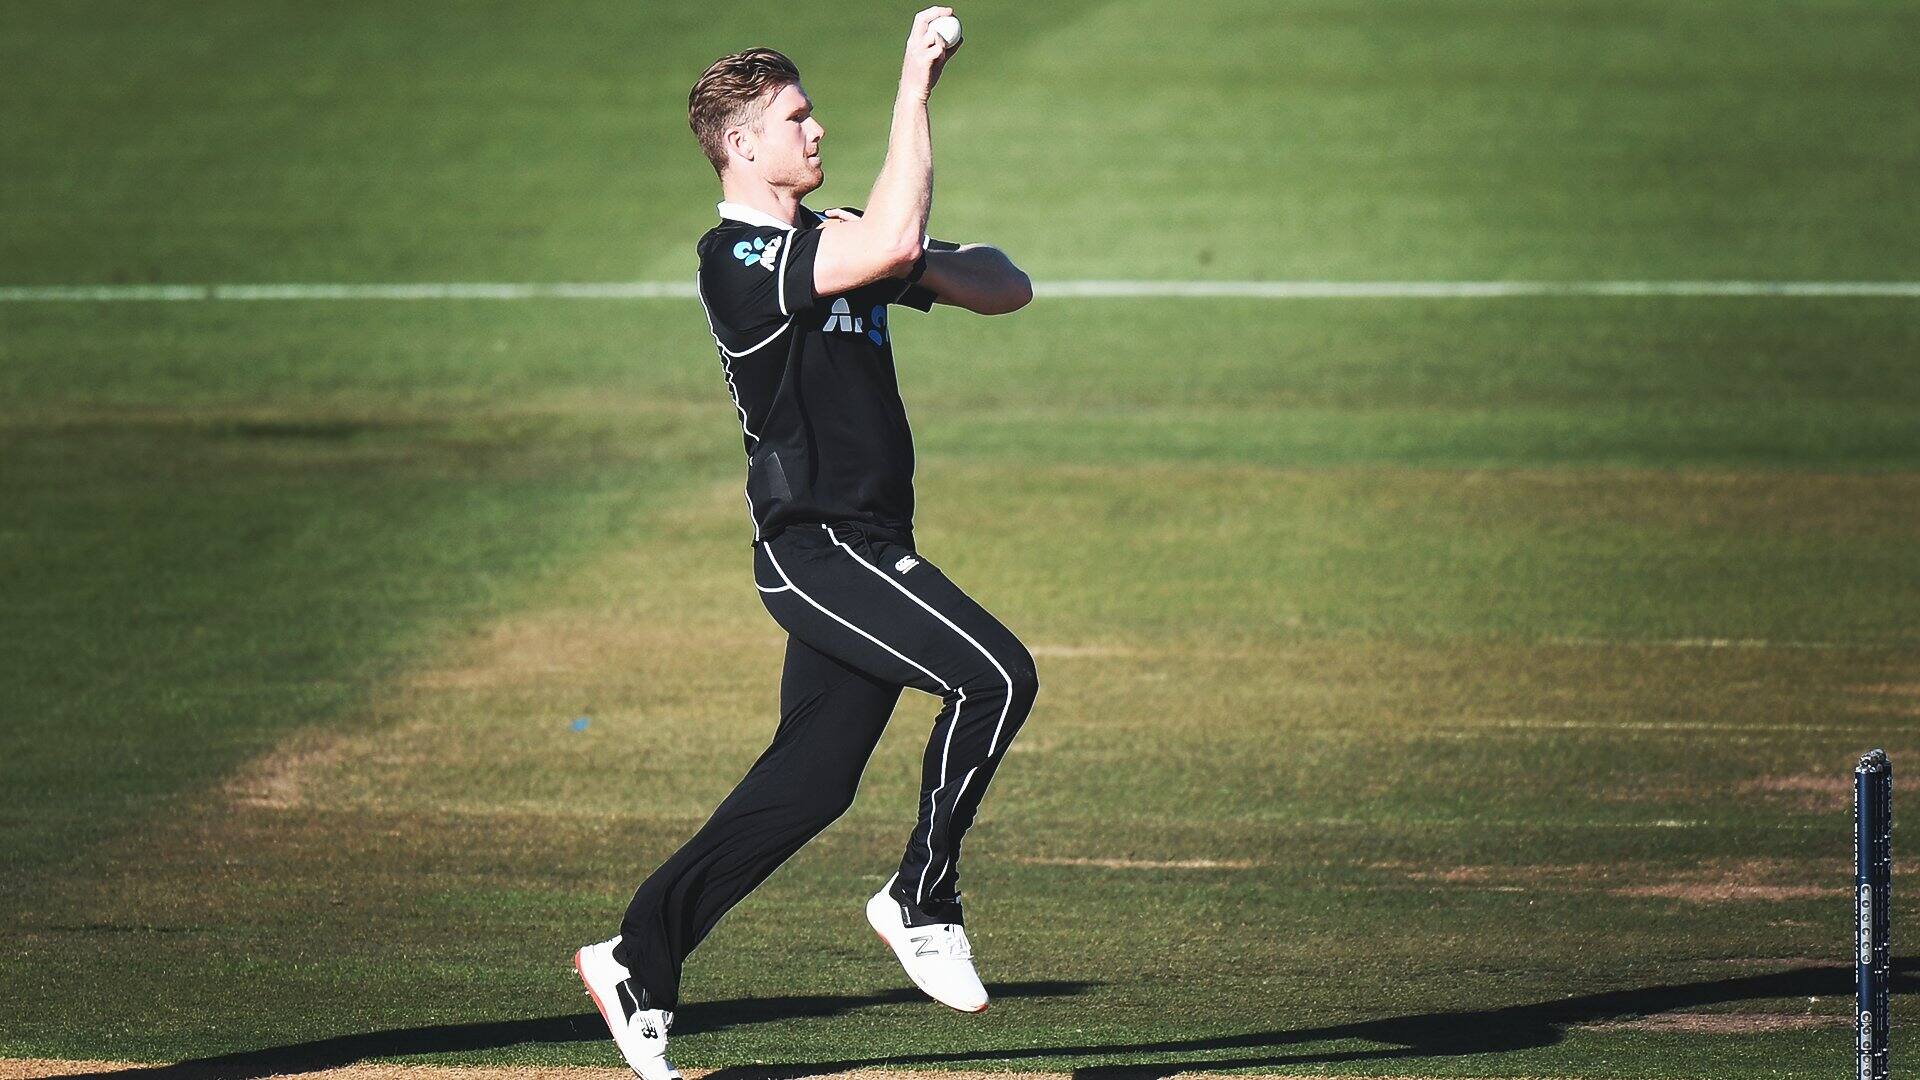 New Zealand all-rounder James Neesham bowls against Bangladesh in the third ODI in Wellington. (Source: Twitter)